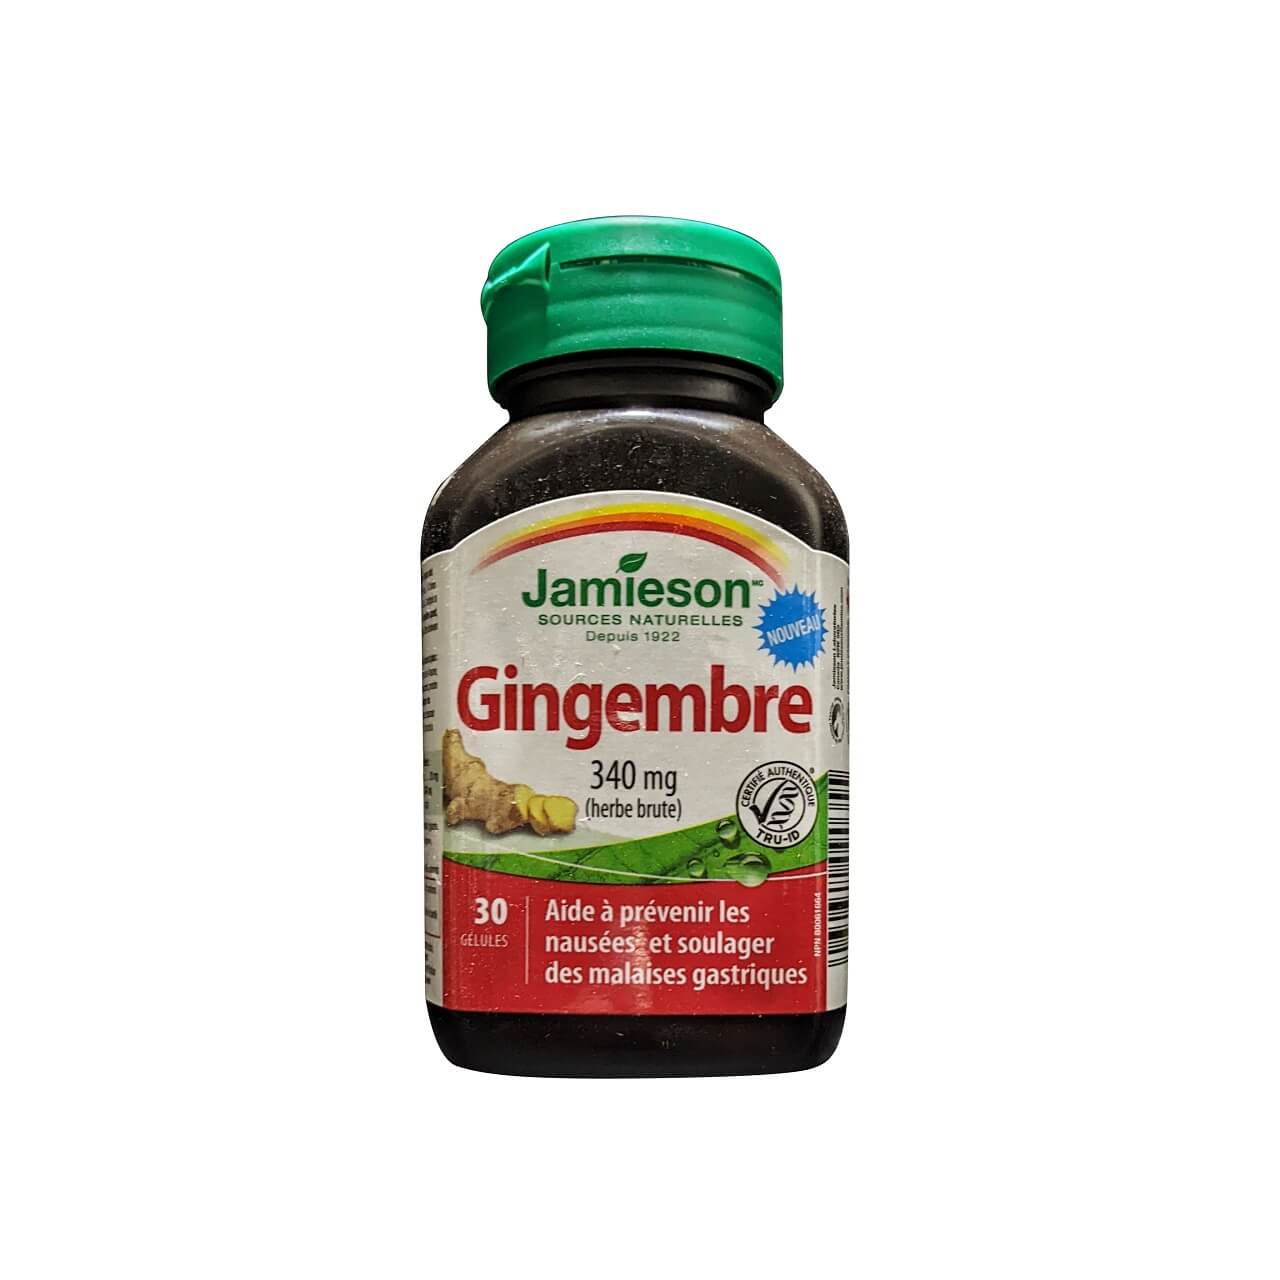 Product label for Jamieson Ginger 340 mg (30 softgels) in French